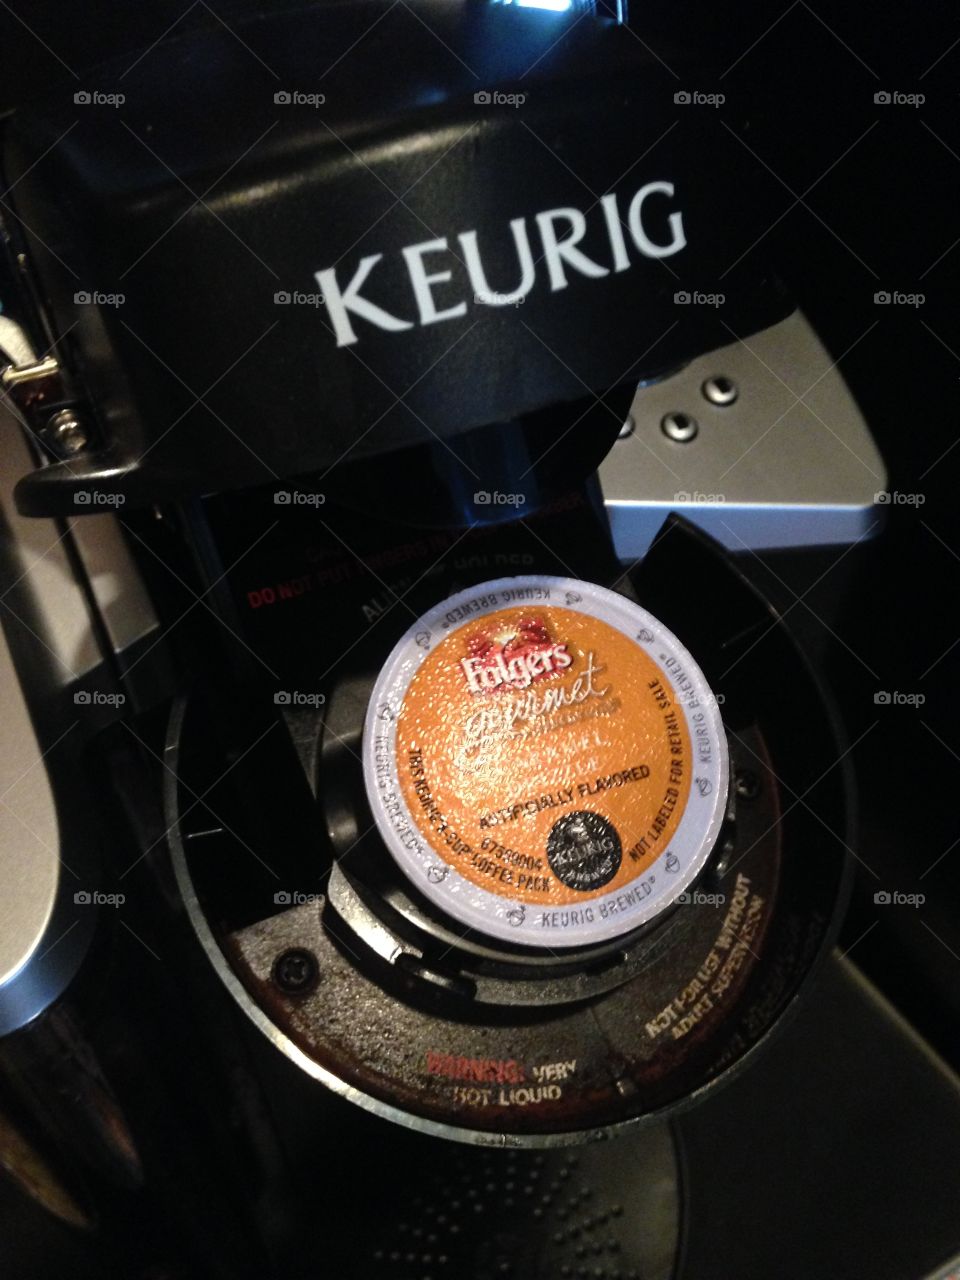 Wake up!. Folger's k cup waiting to wake me up